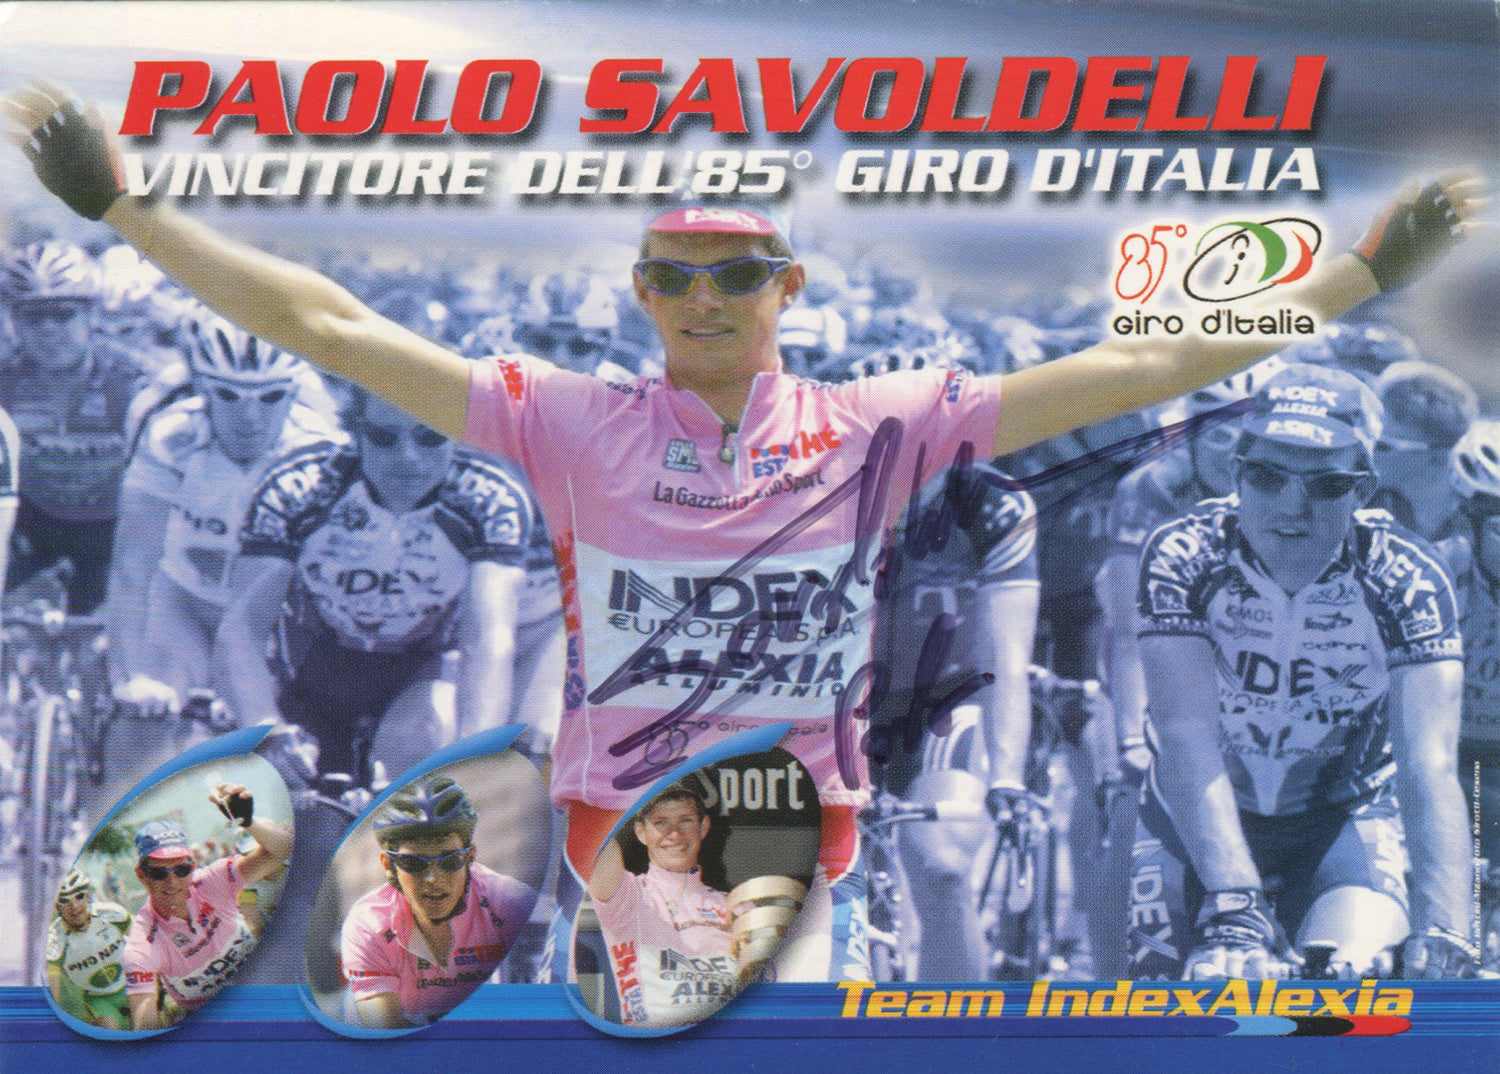 This signed postcard celebrates Paolo Savoldelli winning the 85th edition of the Giro D'Italia in 2002.